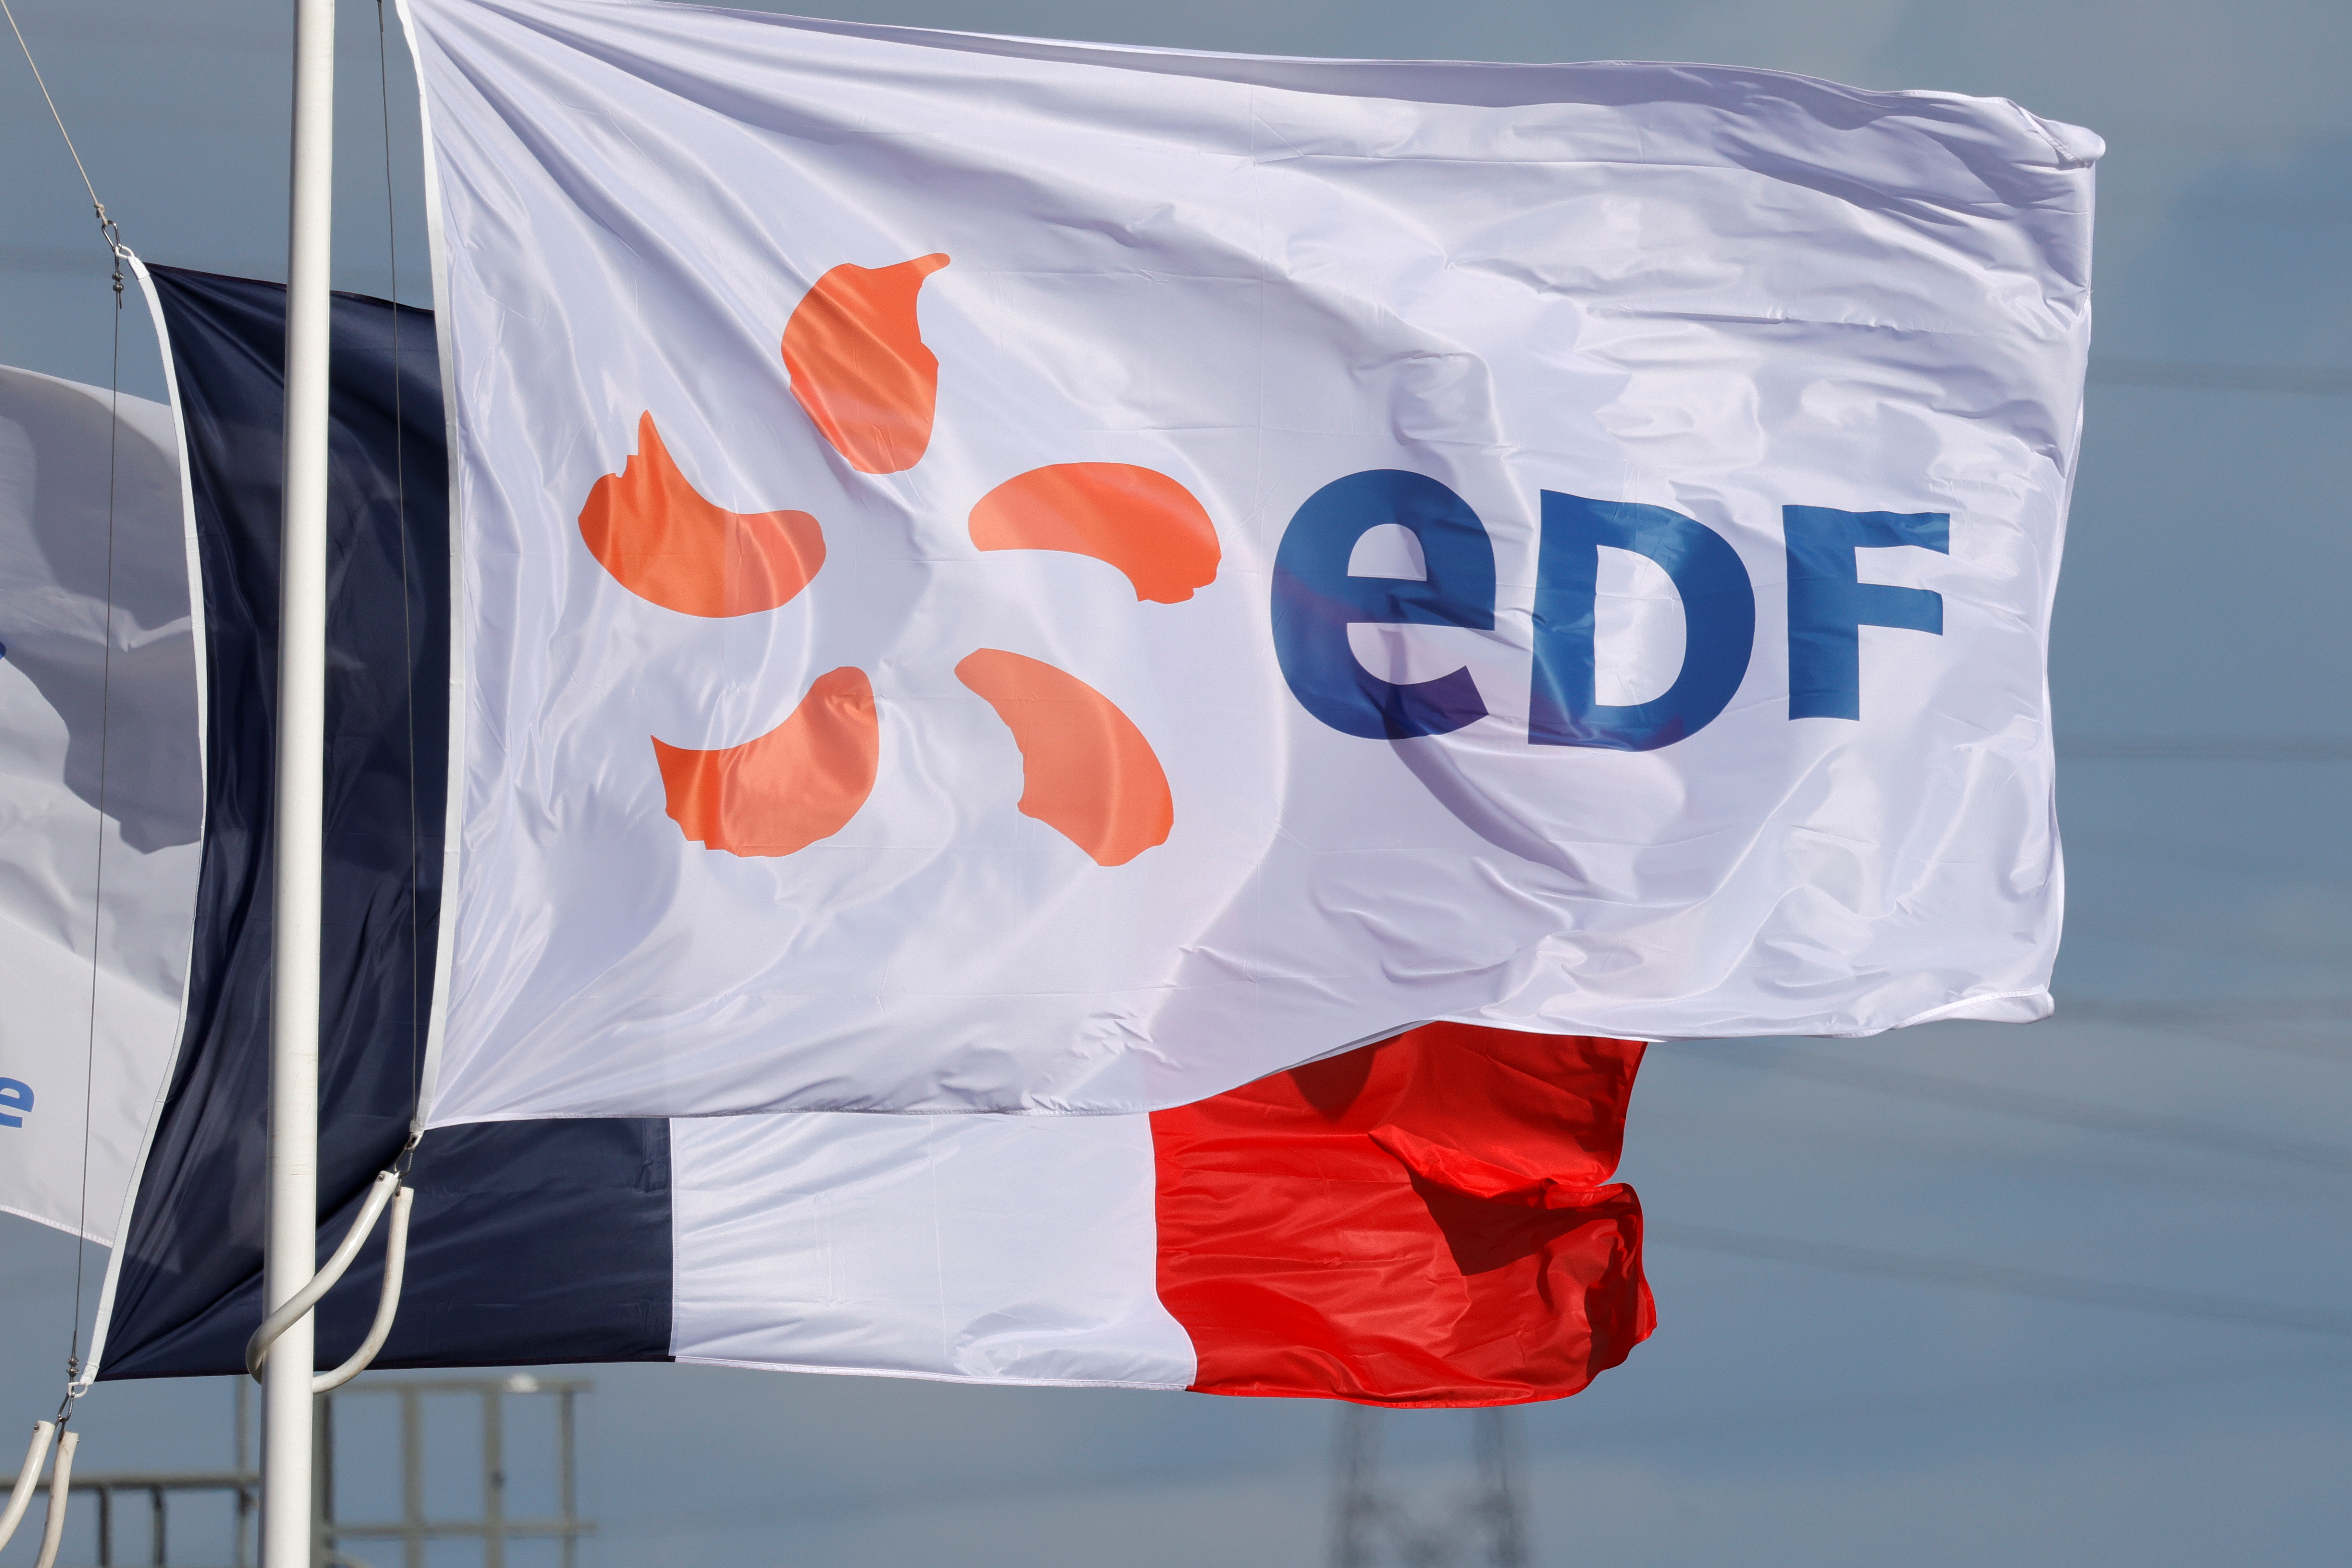 The EDF logo is seen on a flag in Bouchain, near Valenciennes, France, September 29, 2021. REUTERS/Pascal Rossignol